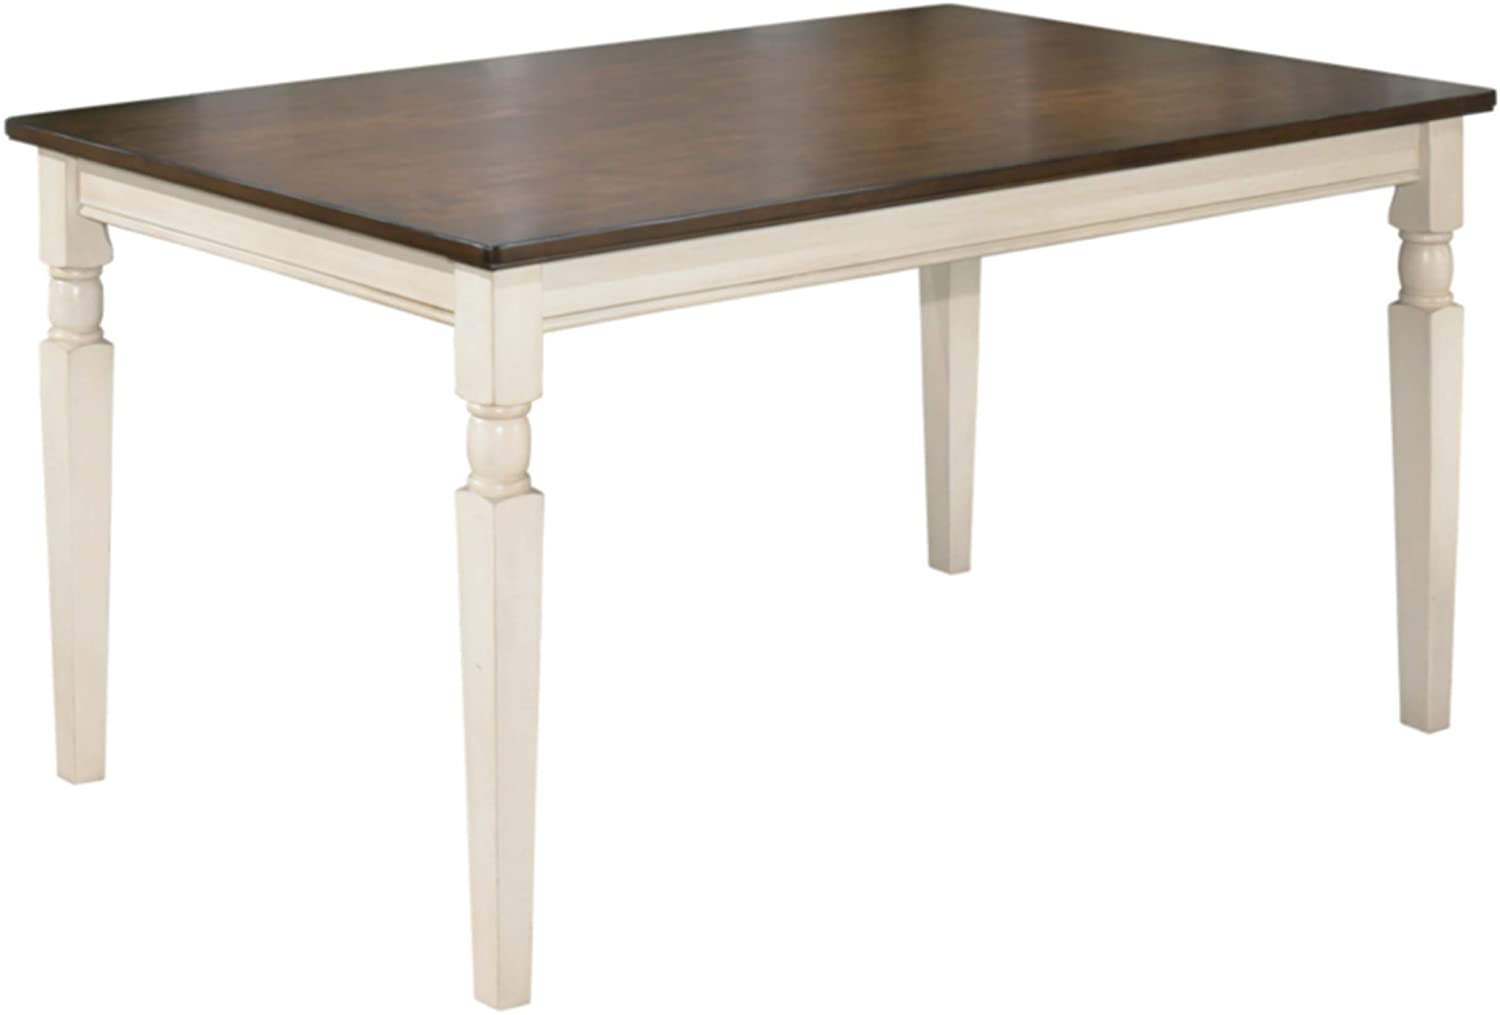 B00BLP3XSO Signature Design by Ashley Whitesburg Dining Room Table, Brown/Cottage White